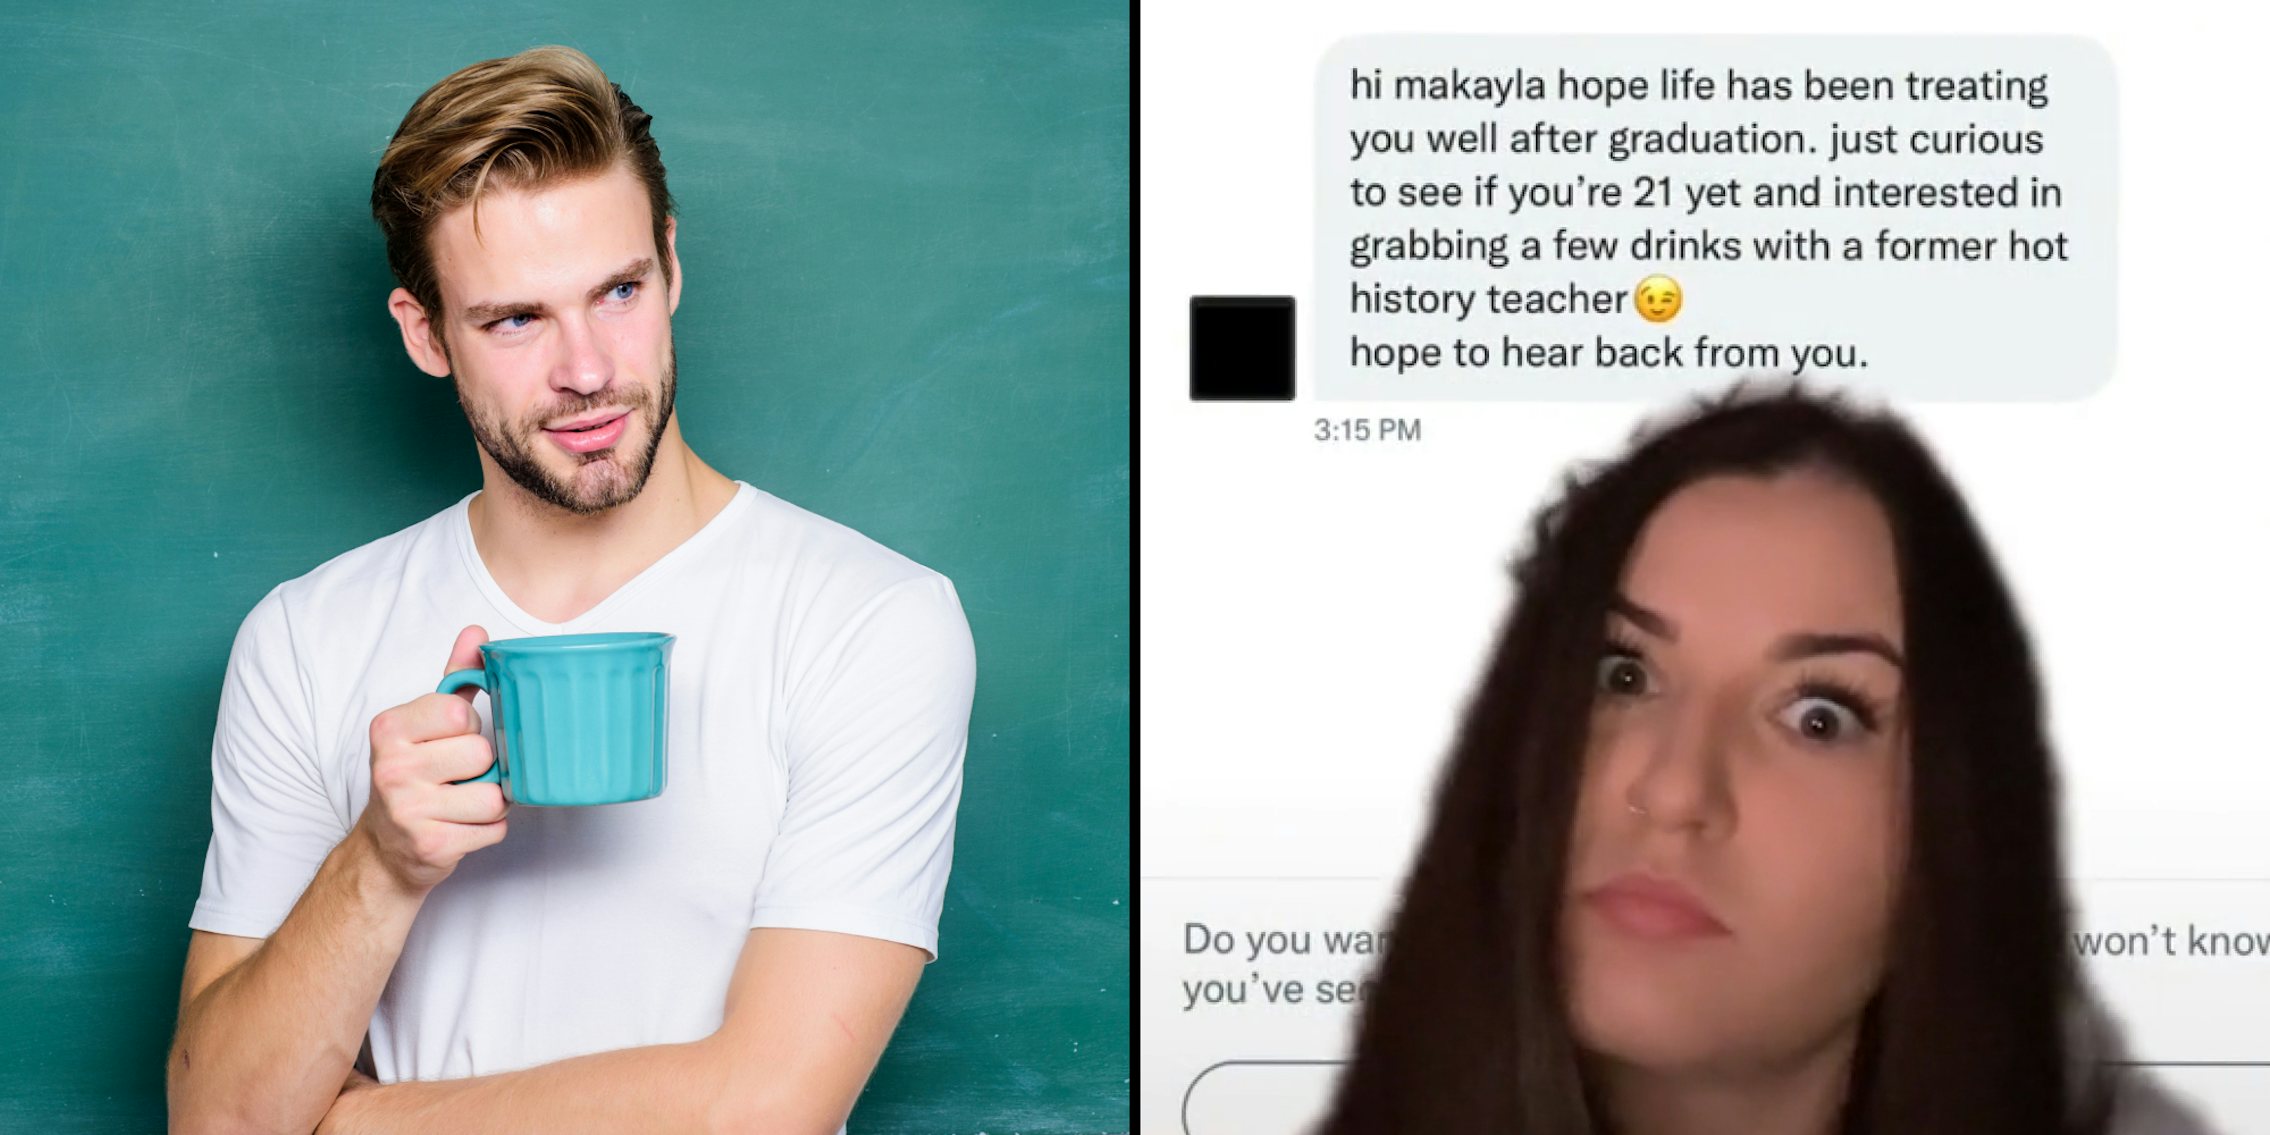 Hot male teacher with coffee cup chalkboard behind (l) Woman greenscreen video over DM's with history teacher caption 'hi makayla hope life has been treating you well after graduation. just curious to see if you're 21 yet and interested in grabbing a few drinks with a former hot history teacher hope to hear back from you.' (r)